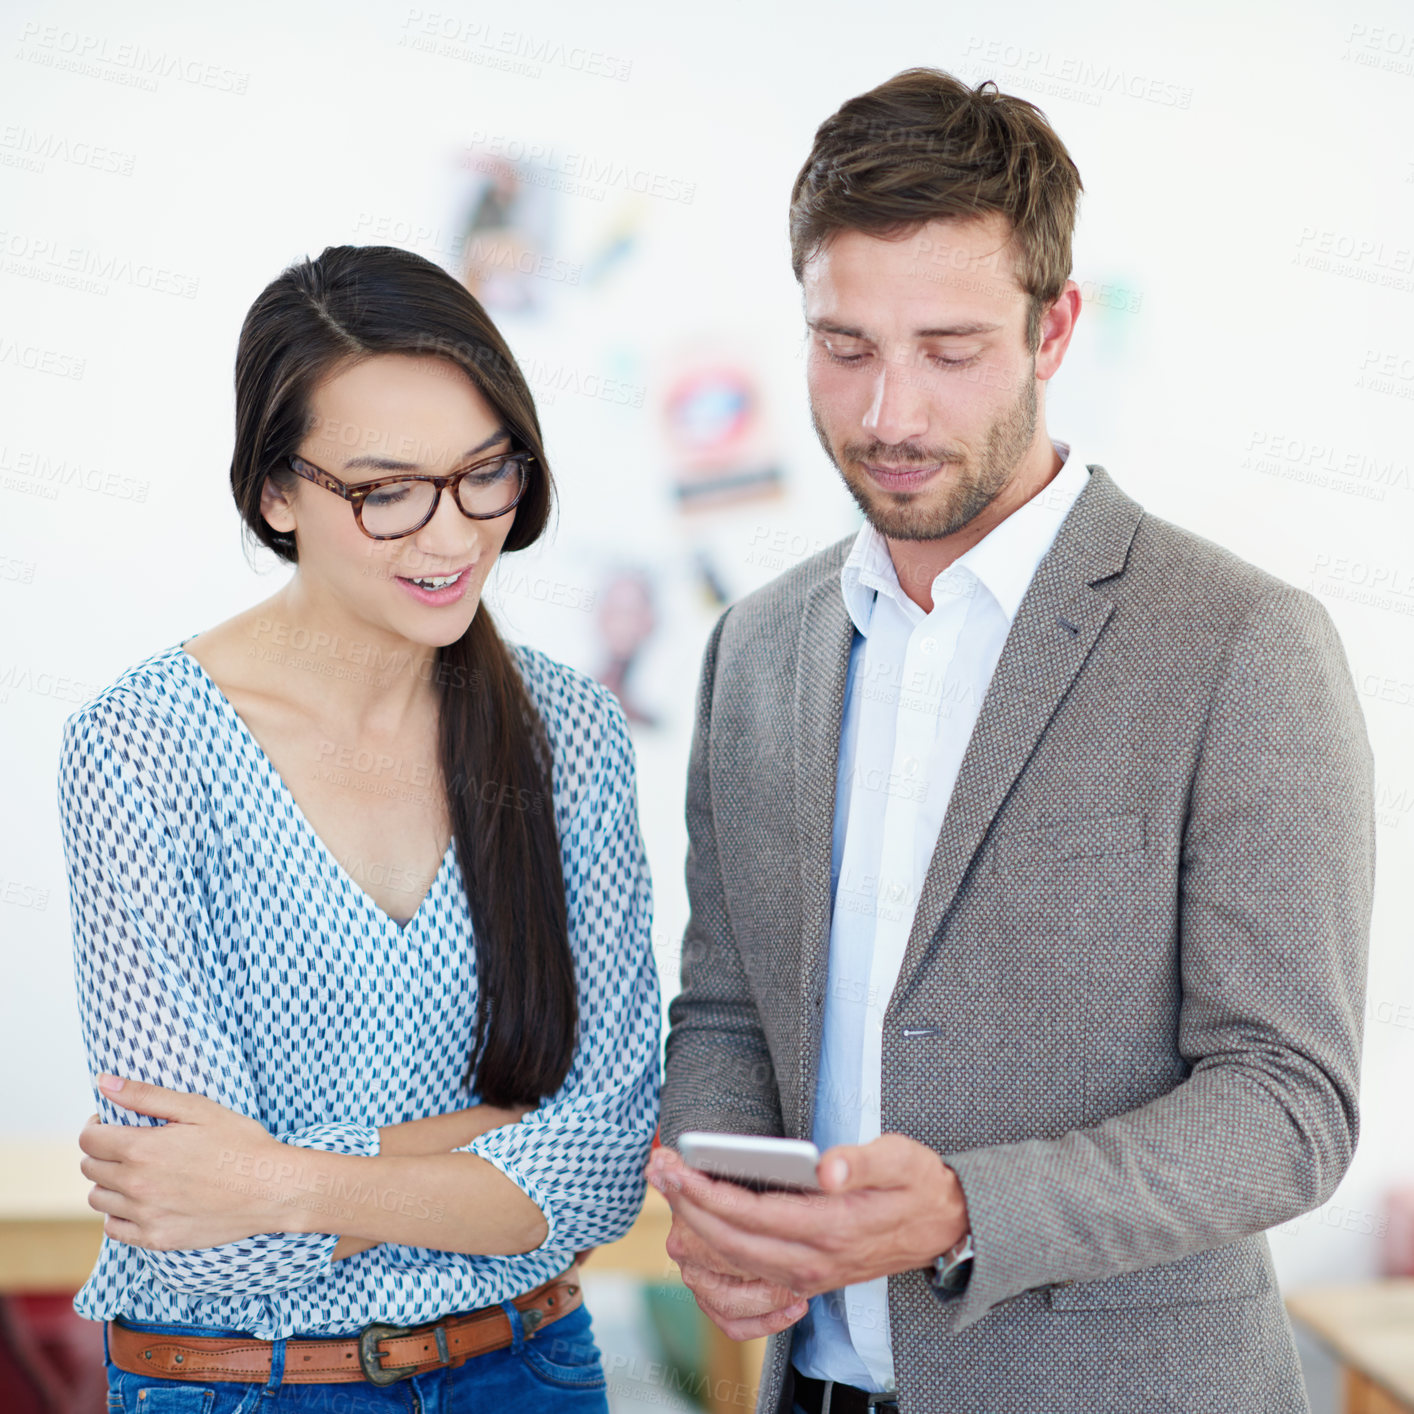 Buy stock photo Shot of two coworkers looking at a cellphone while standing in their office